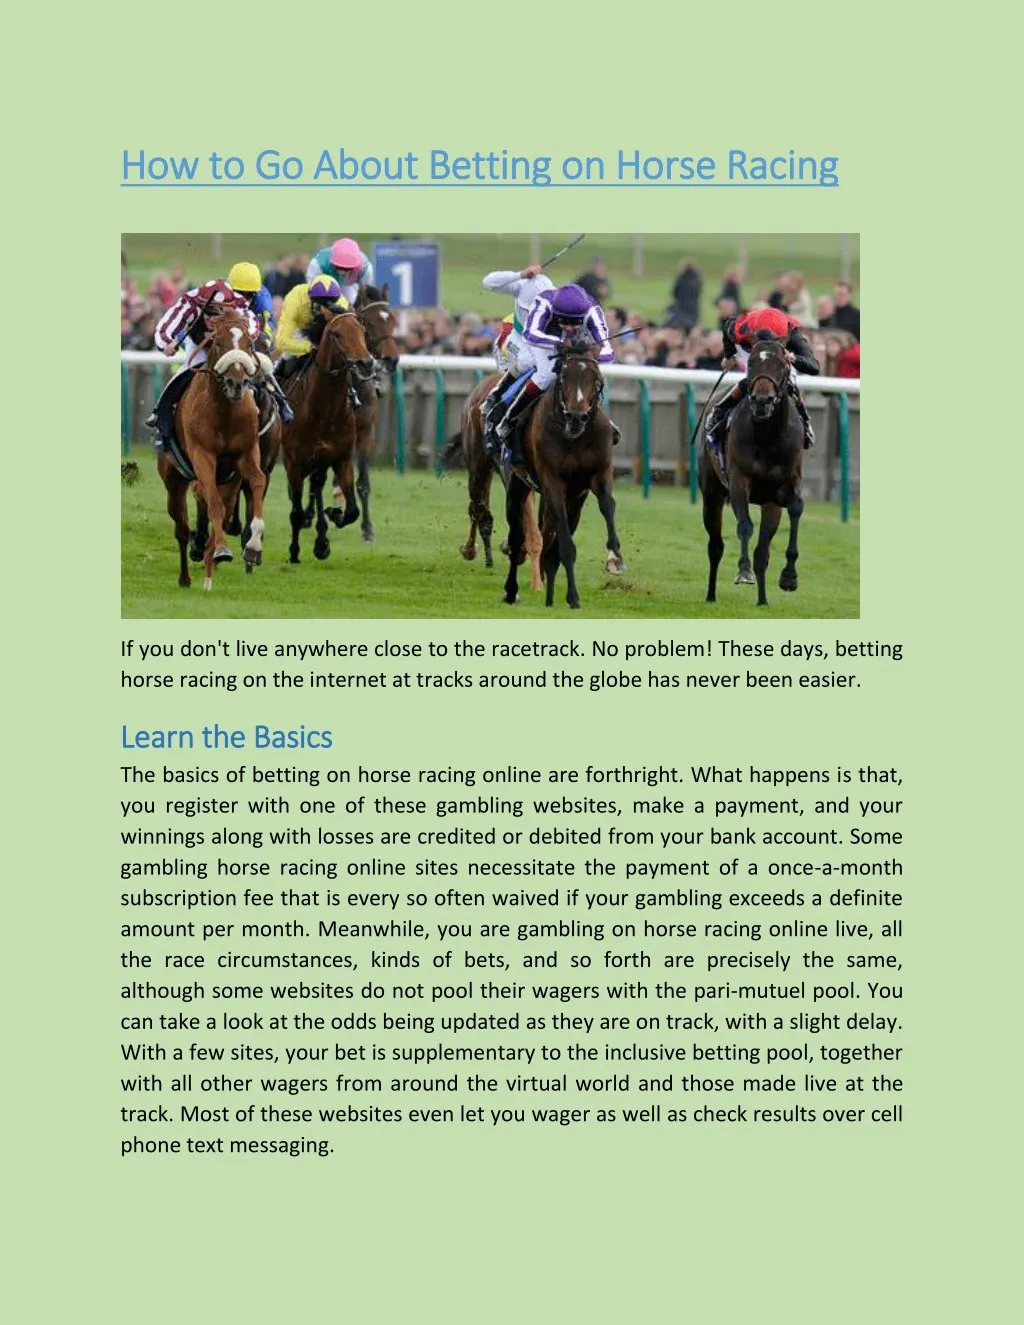 how to go about betting on horse racing